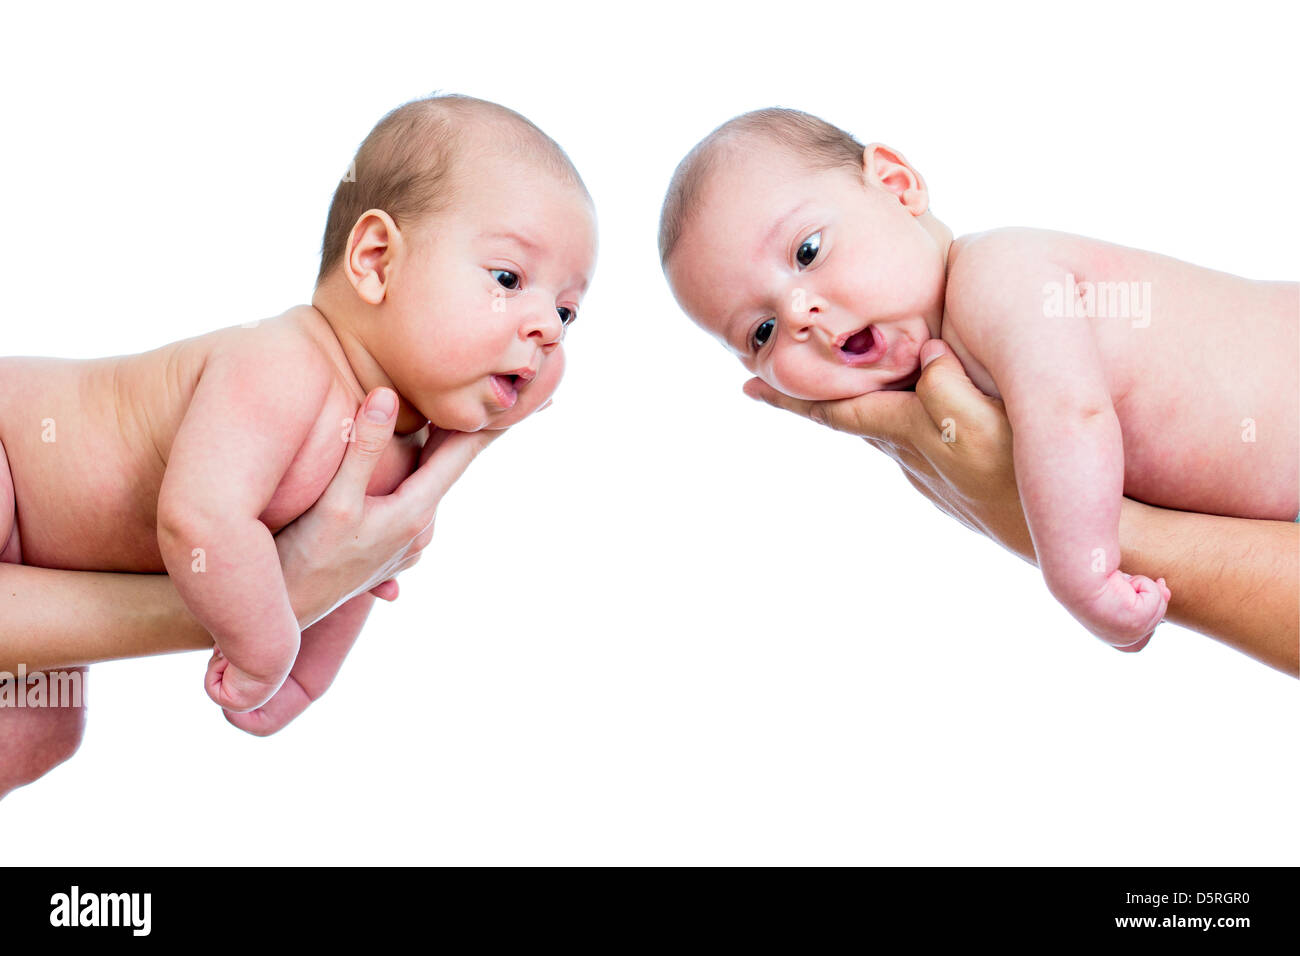 small babies twins on parental hands isolated on white background Stock Photo